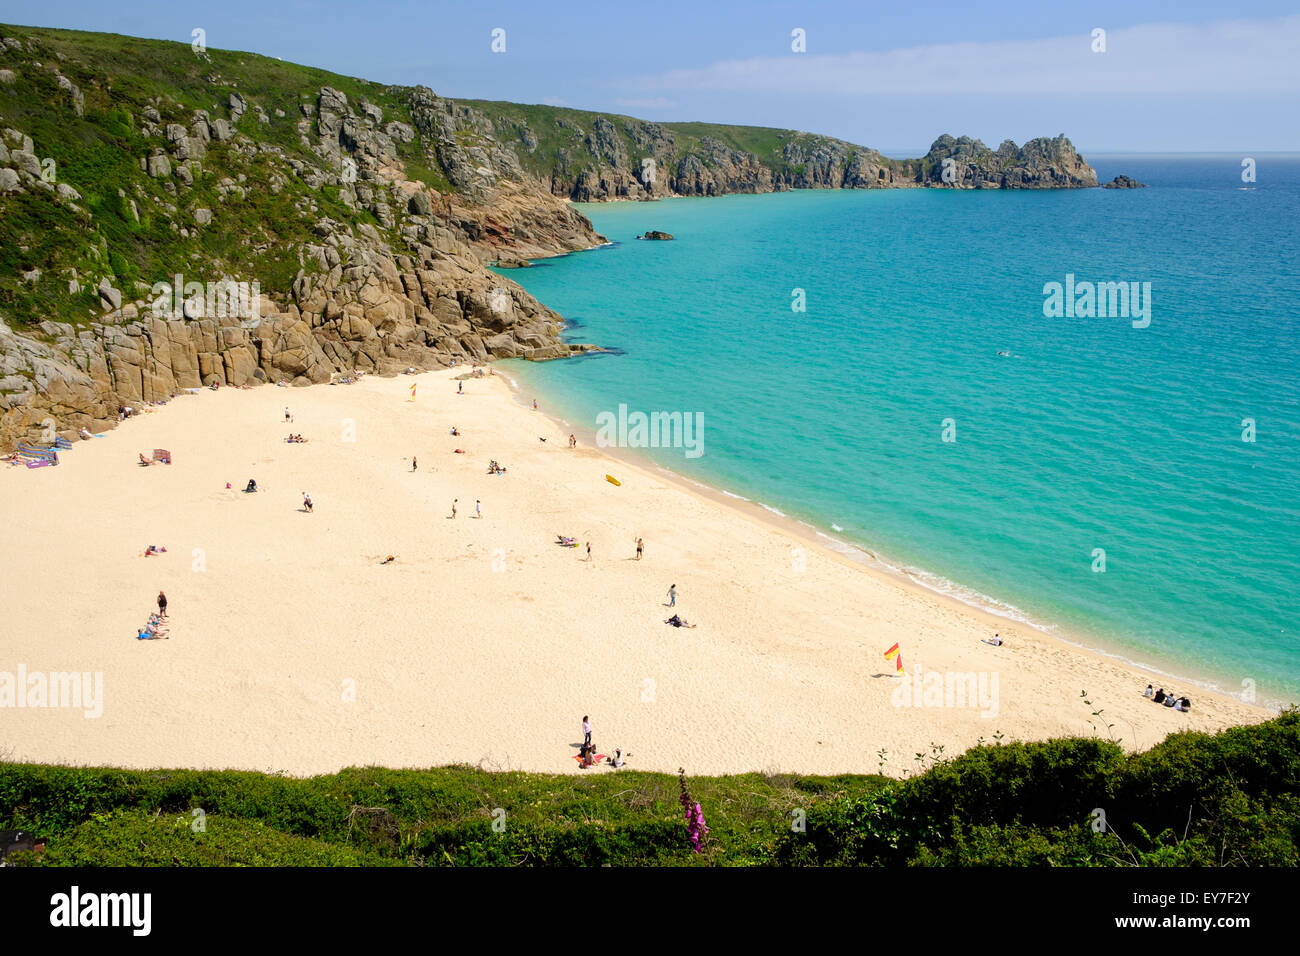 Porthcurno beach and cove, Cornwall, England, UK in summer Stock Photo